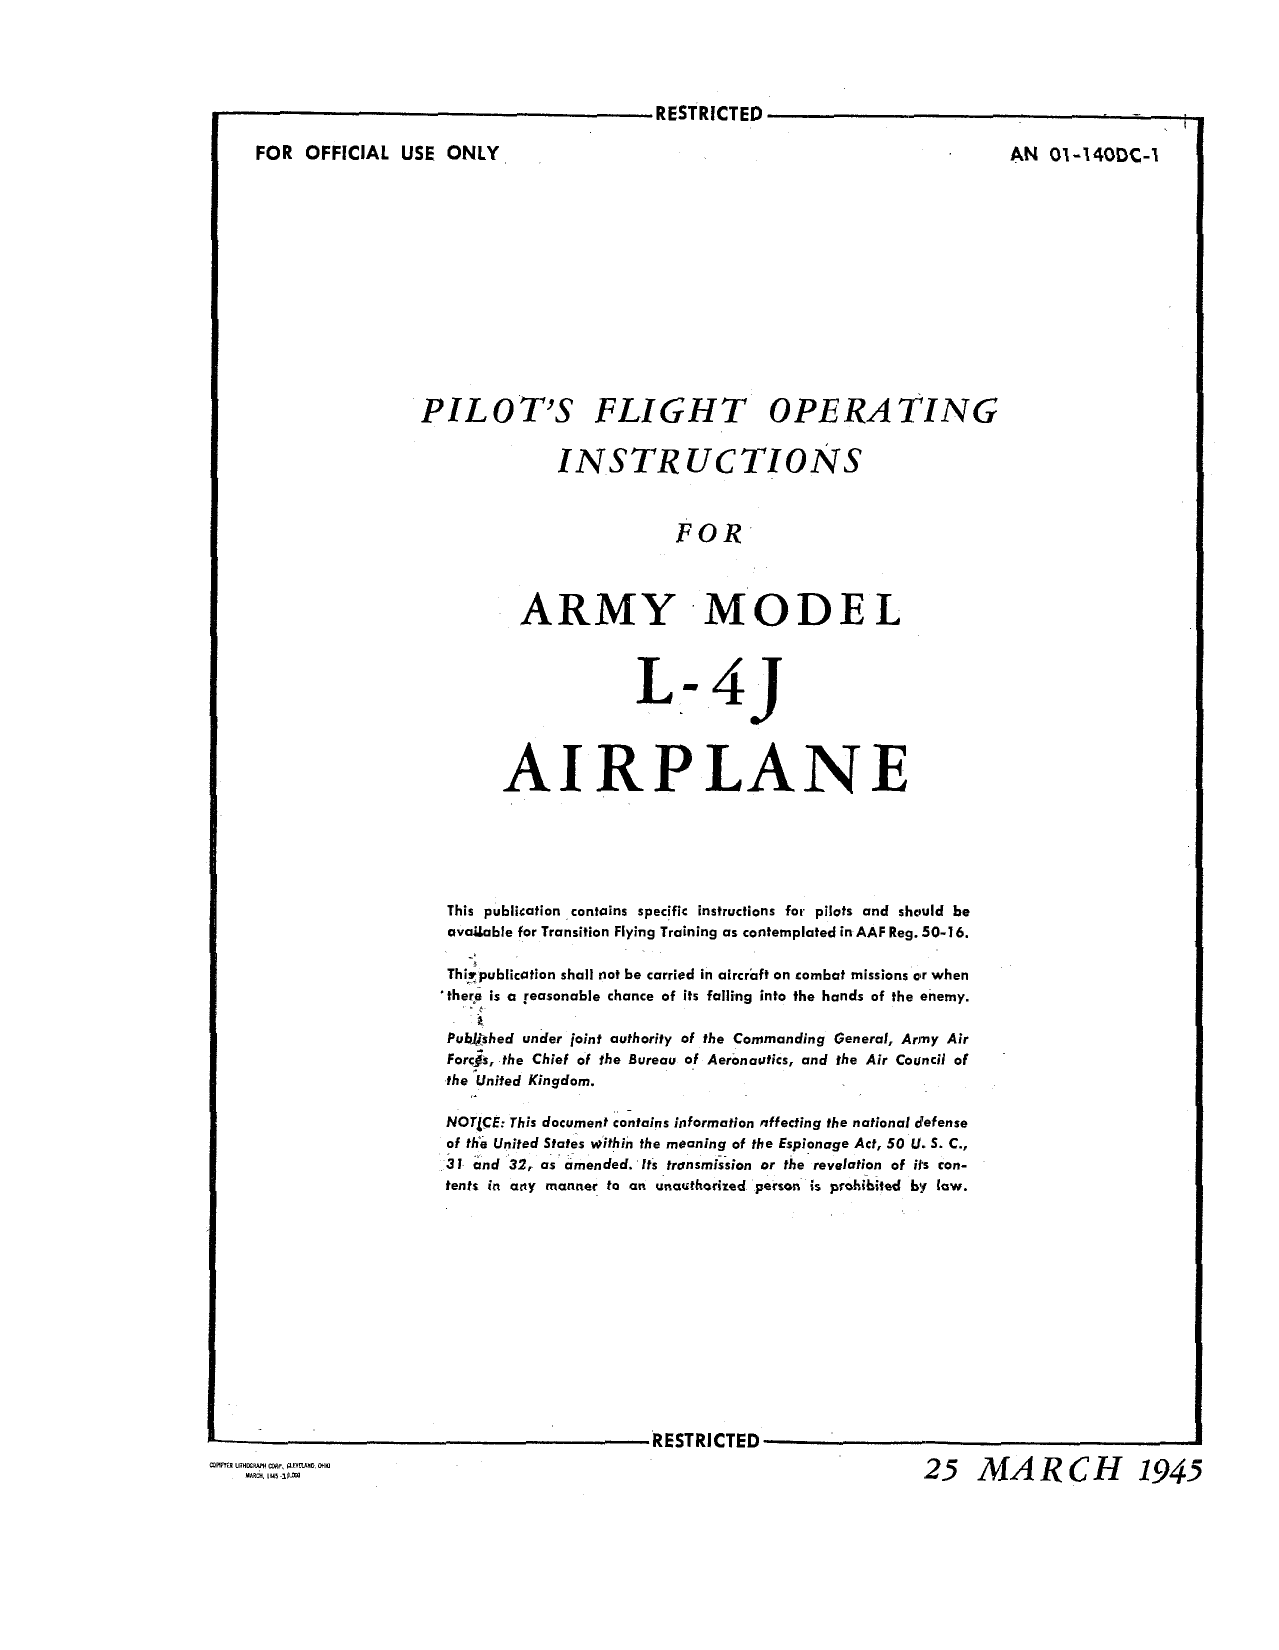 Sample page 1 from AirCorps Library document: Pilot's Flight Operating Instructions for Army Model L-4J